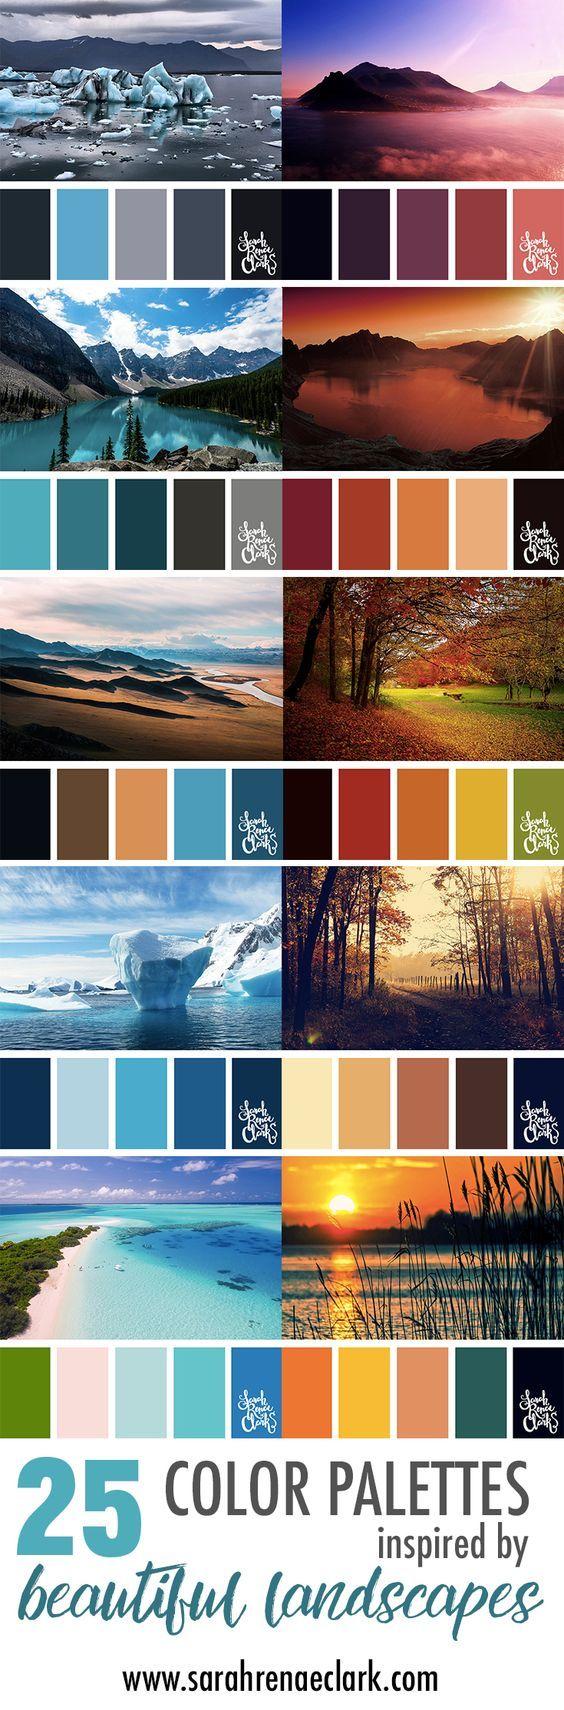 Wedding - 25 Color Palettes Inspired By Beautiful Landscapes